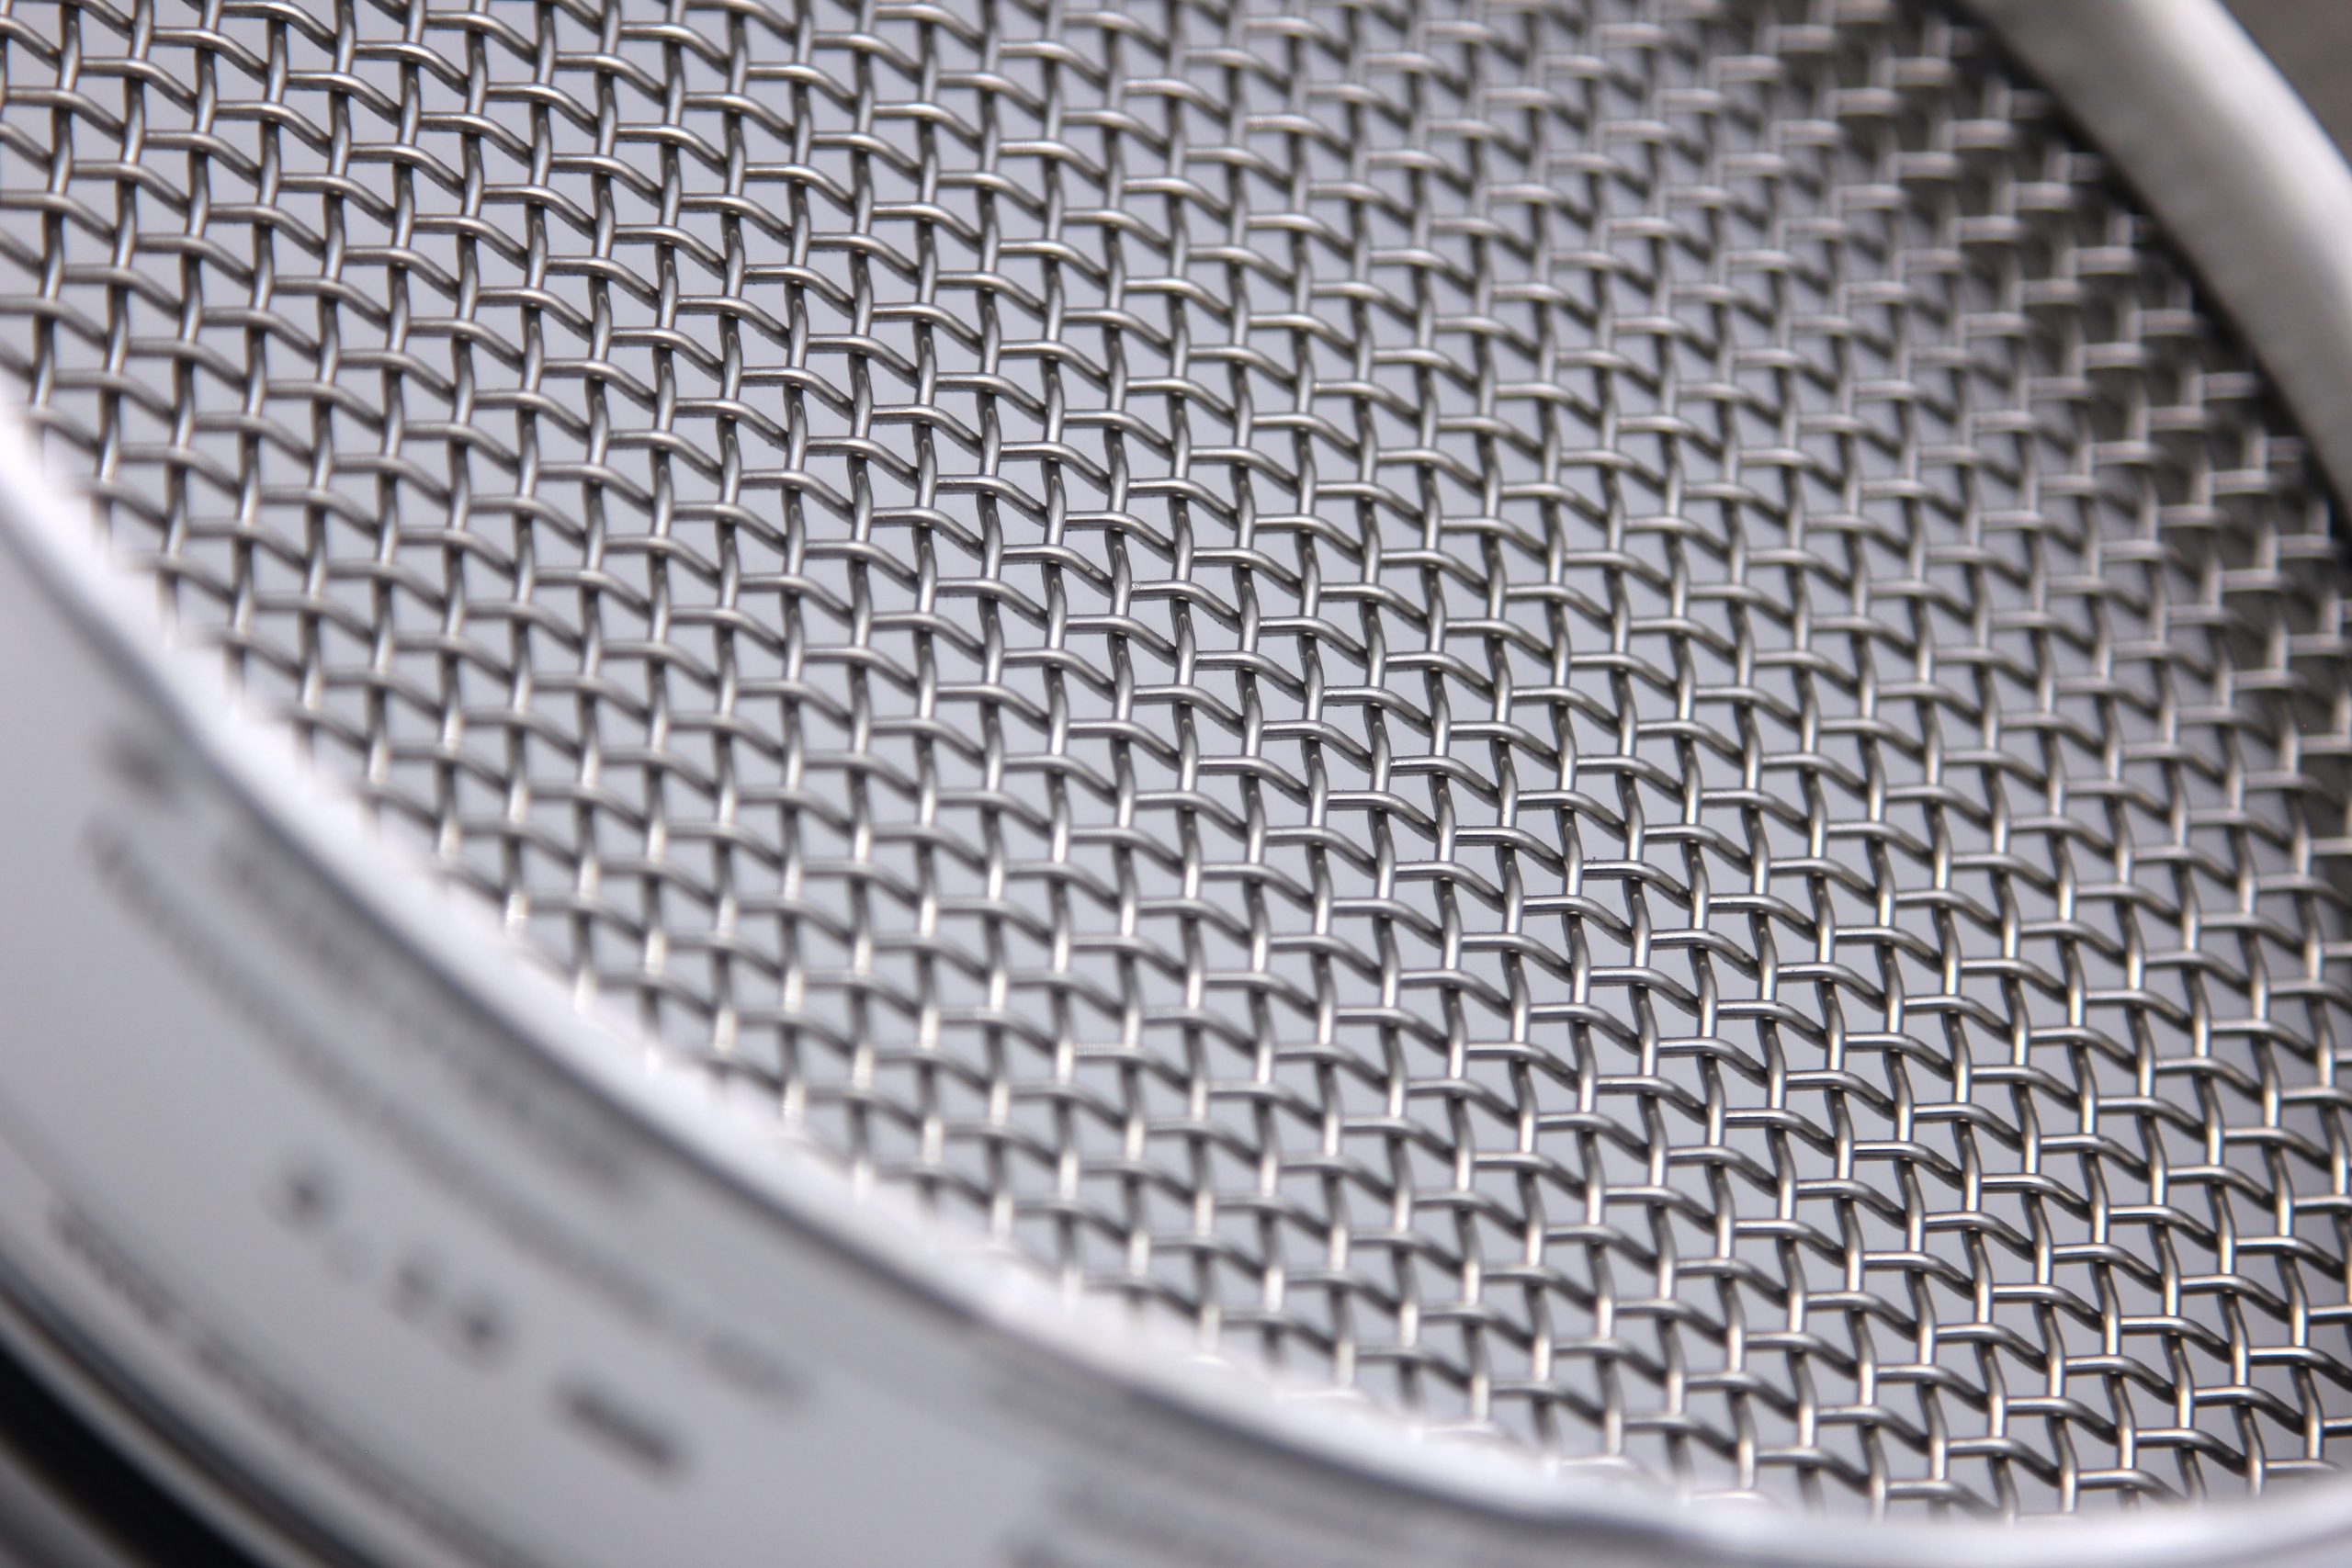 KimLab ISO 3310 STD 8 Pcs Test Sieves with Lid&Pan,SS Frame and Wire,#5,#10,#35,#60,#120,#230 Mesh Size,20cm Diameter 